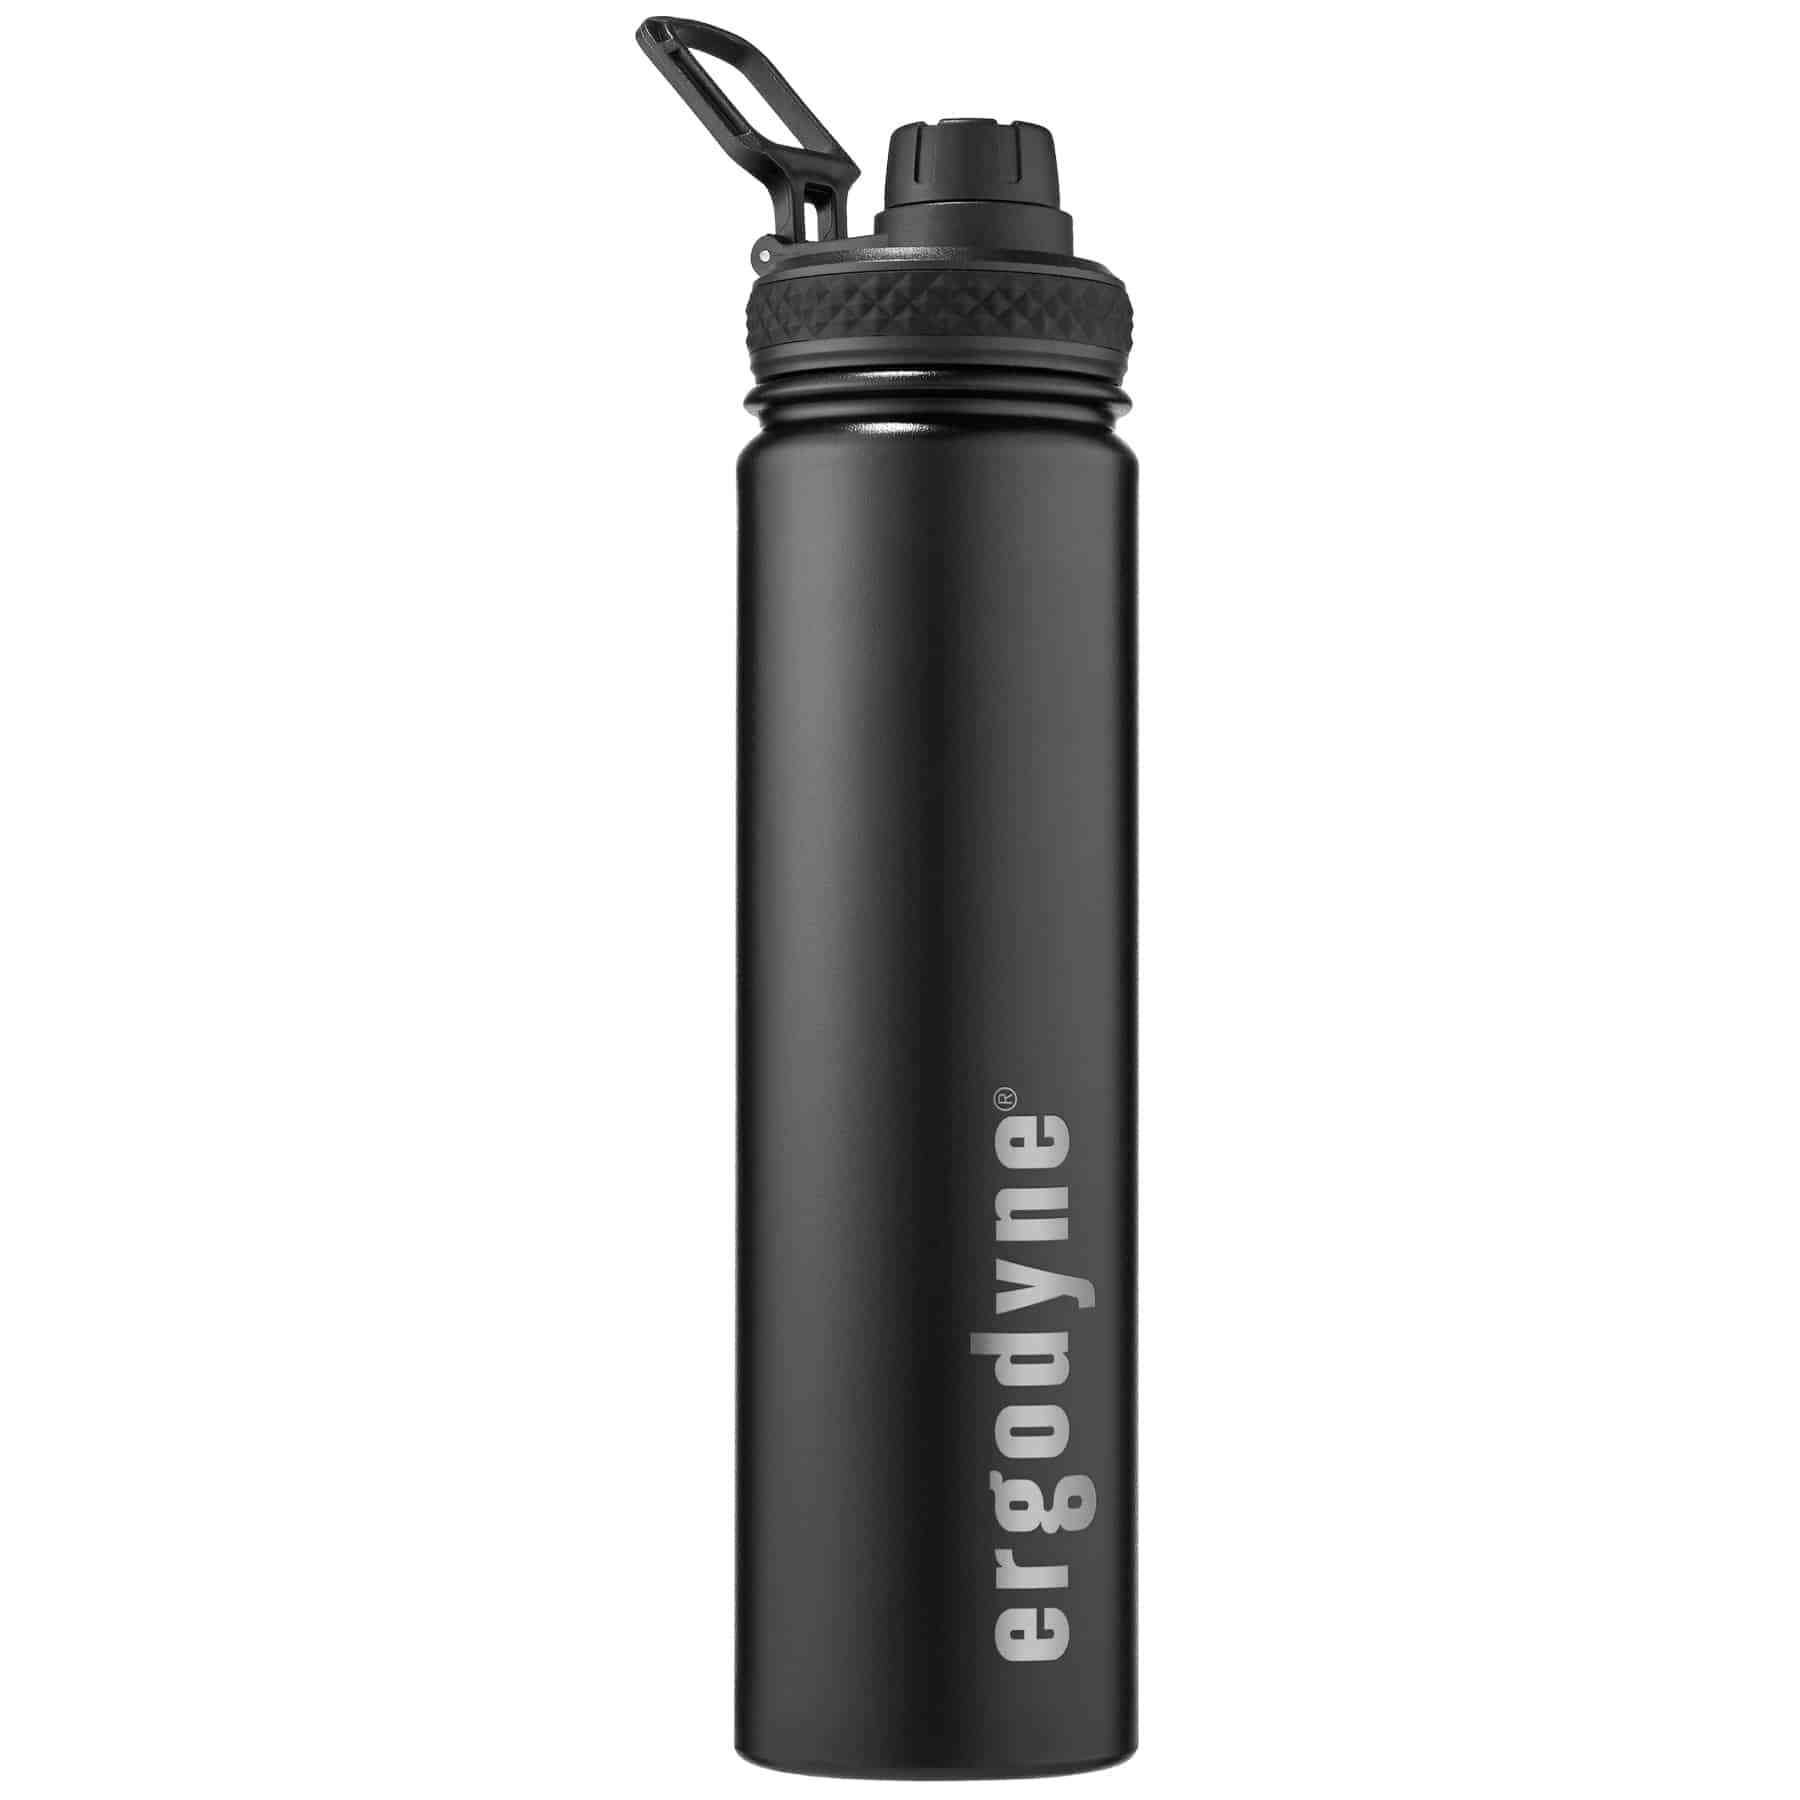 https://www.ergodyne.com/sites/default/files/product-images/5152-insulated-stainless-steel-water-bottle-black-front_0.jpg